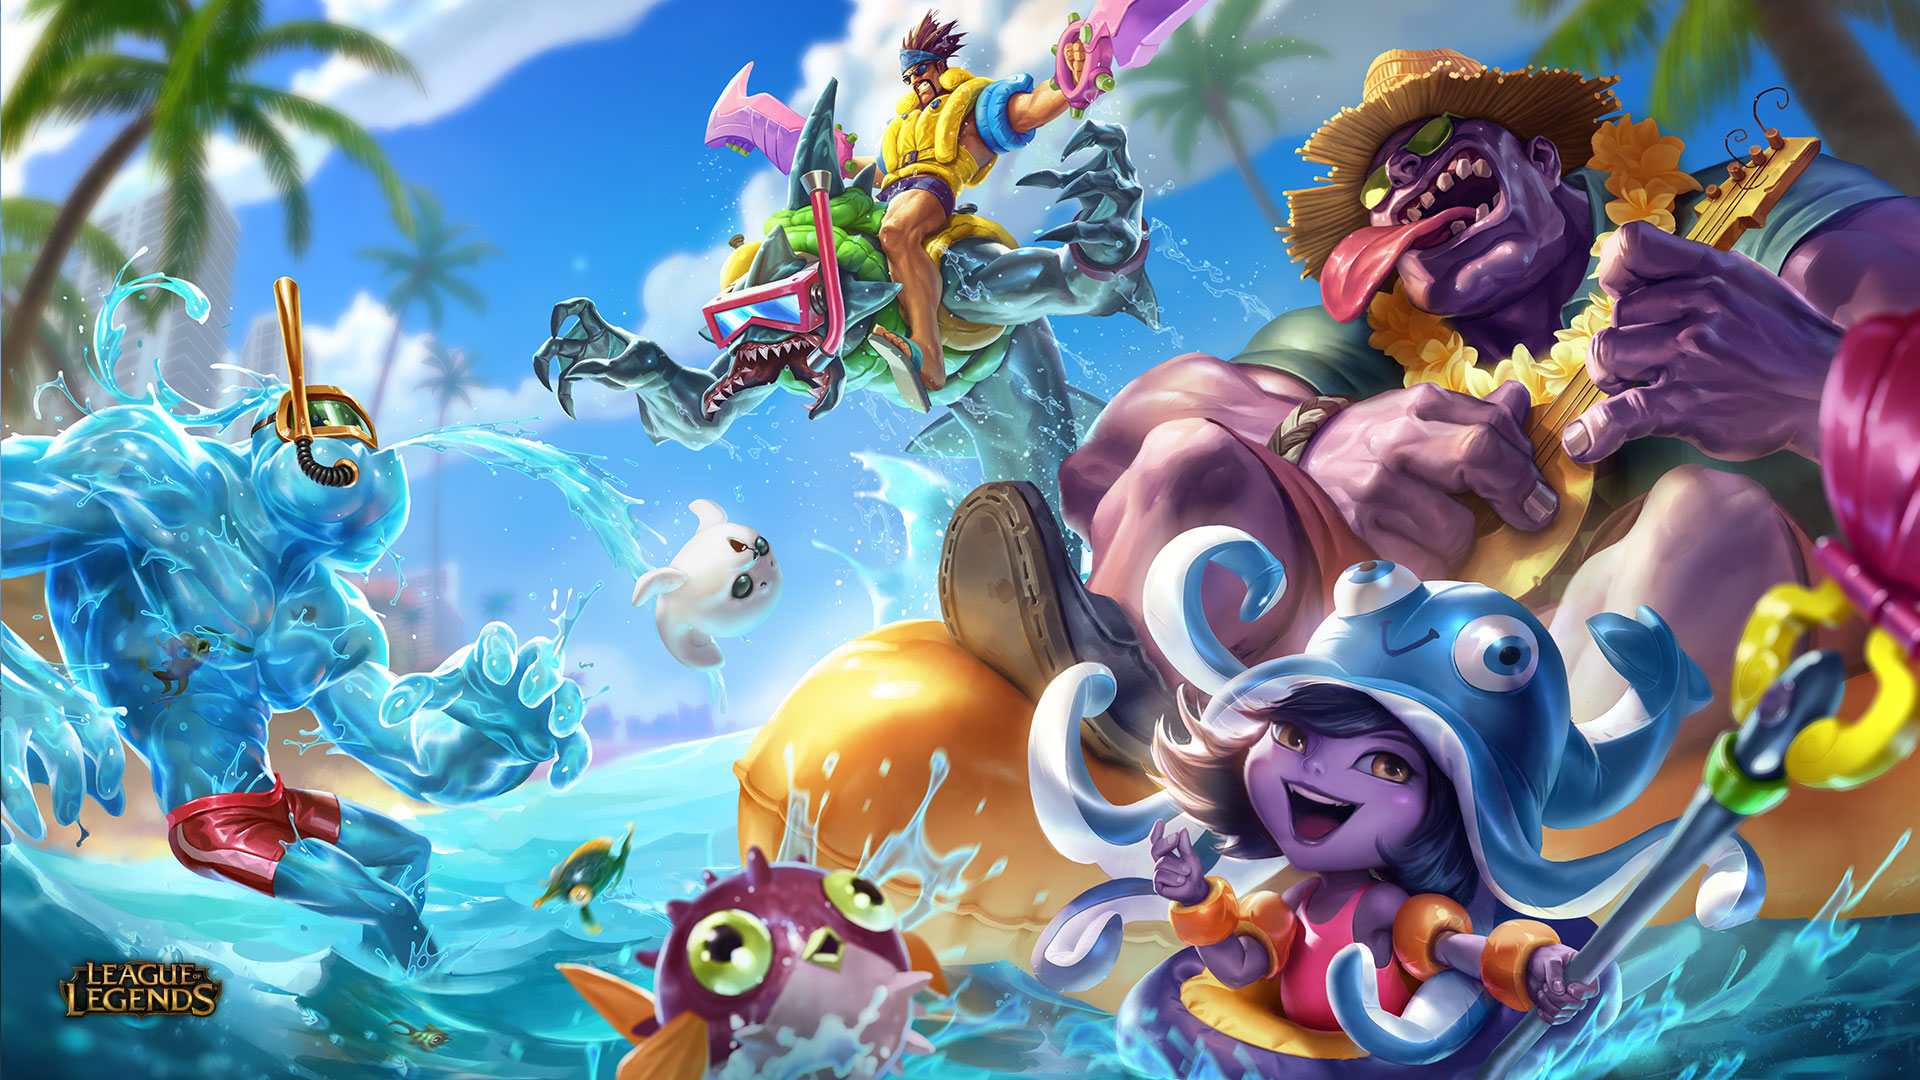 League of Legends ：Wild Rift Pool Party by Cindy Feng